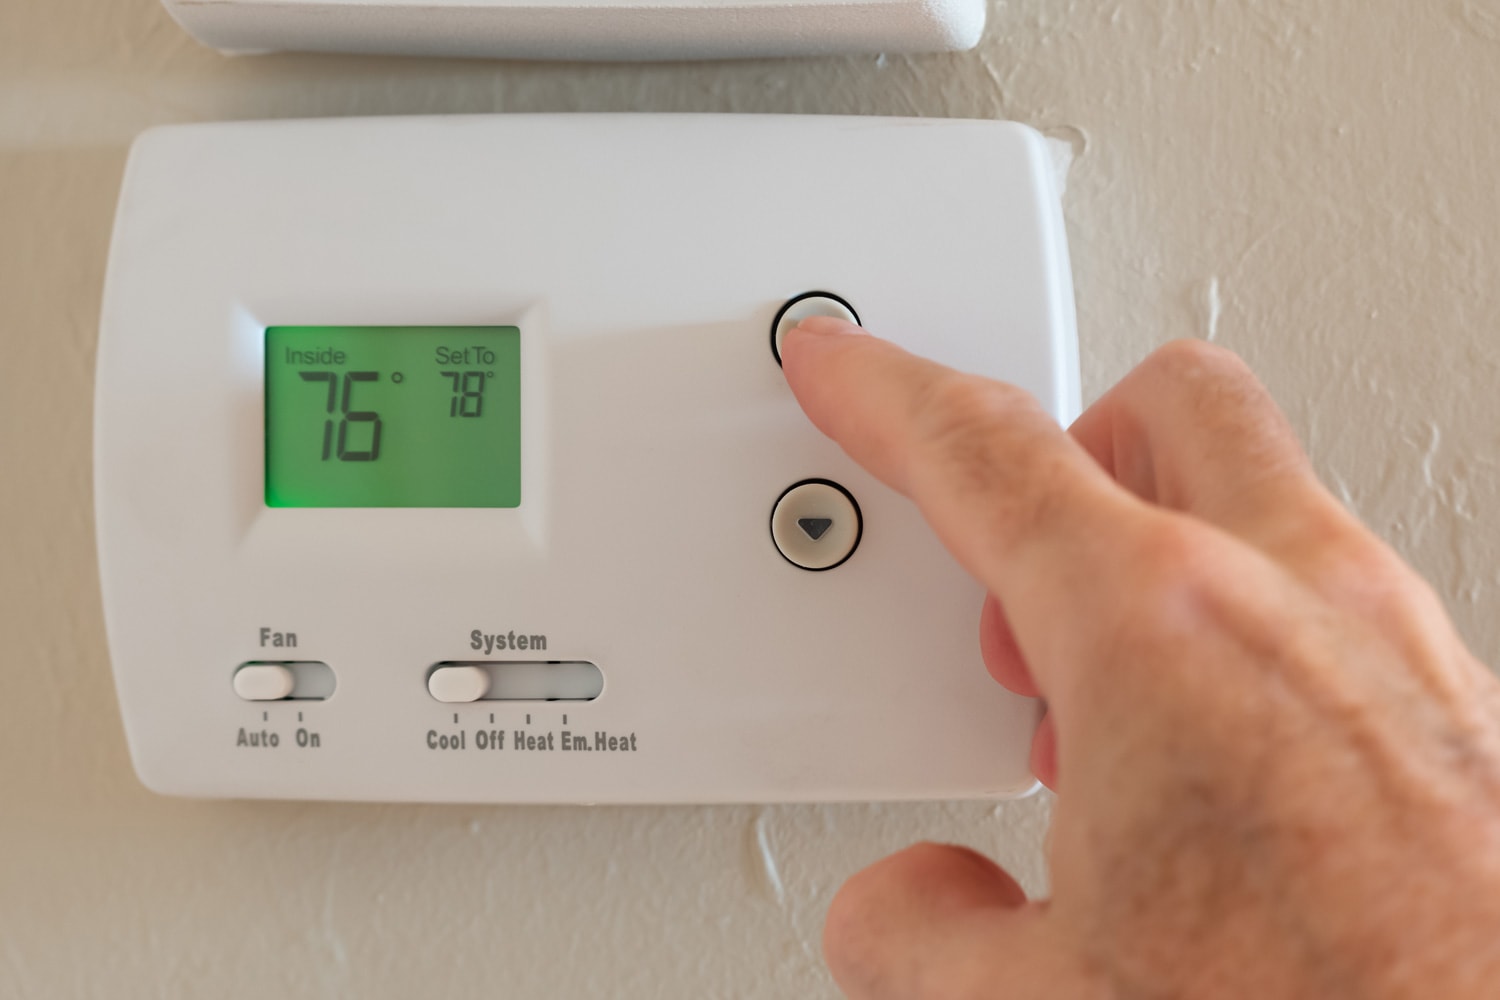 Setting digital thermostat to cool and programming air conditioning to energy saving temperature of 78 degrees.